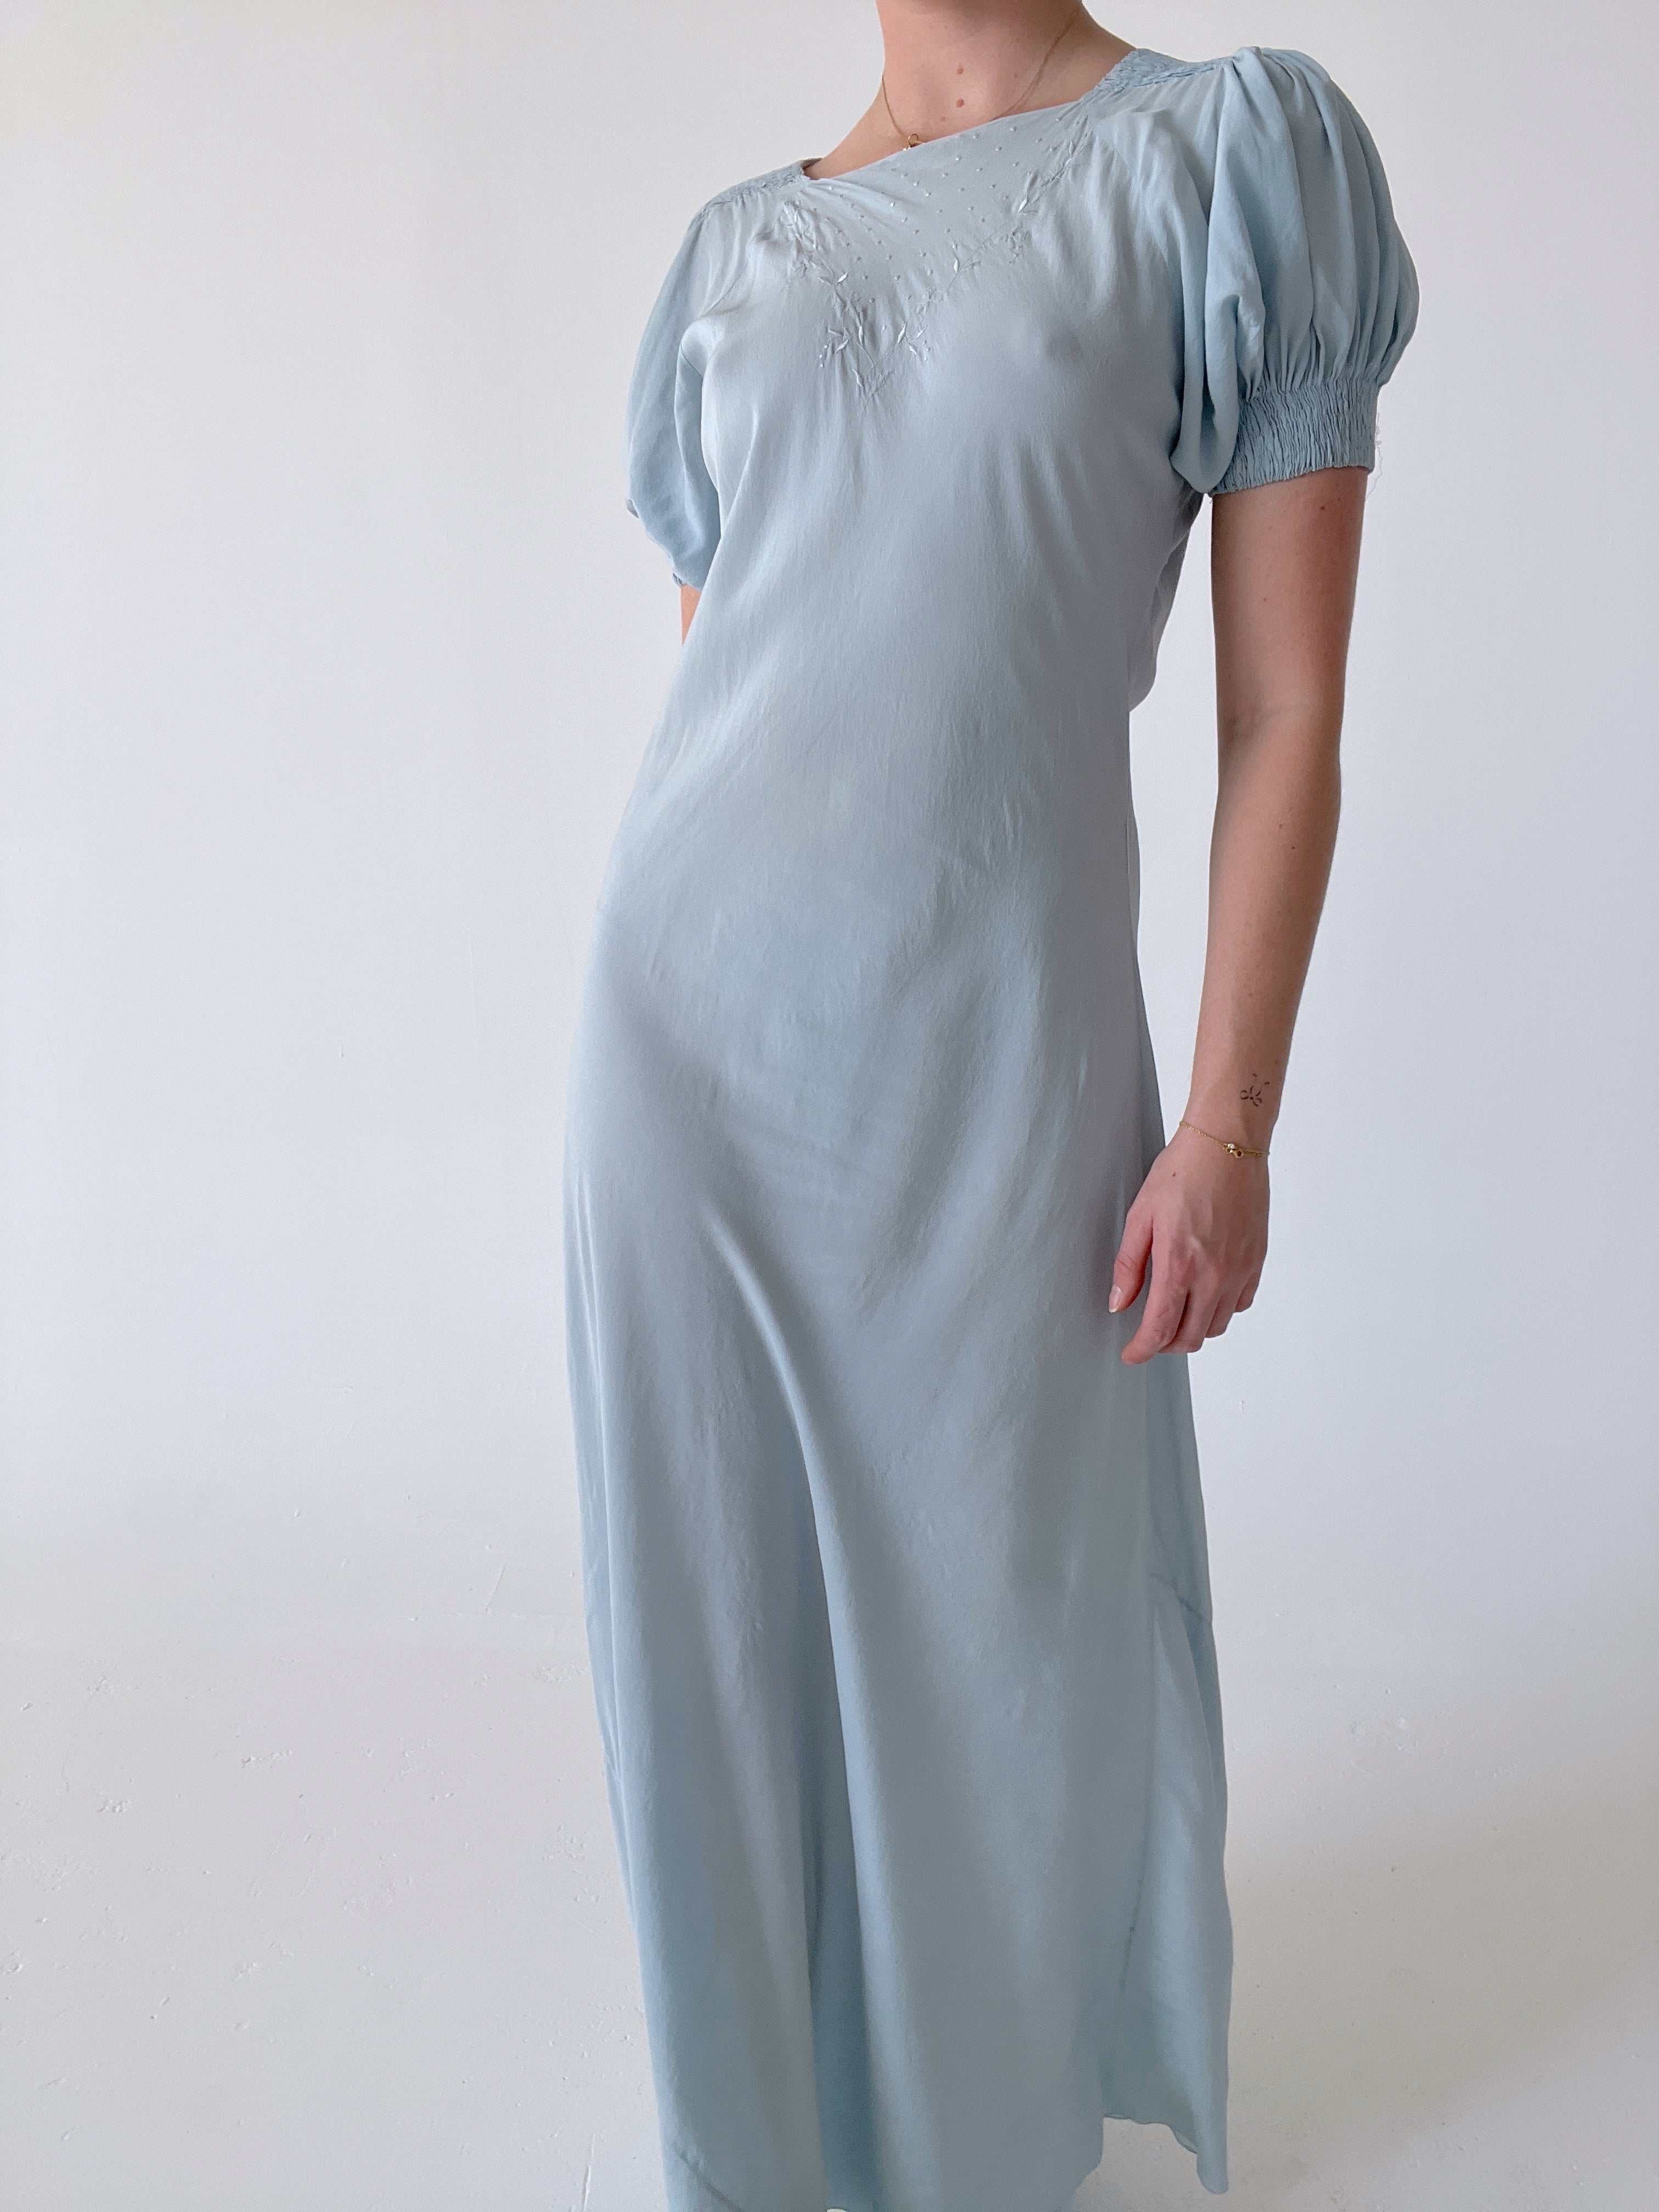 1930's Blue Silk Puff Sleeve Dress with Clover Embroidery